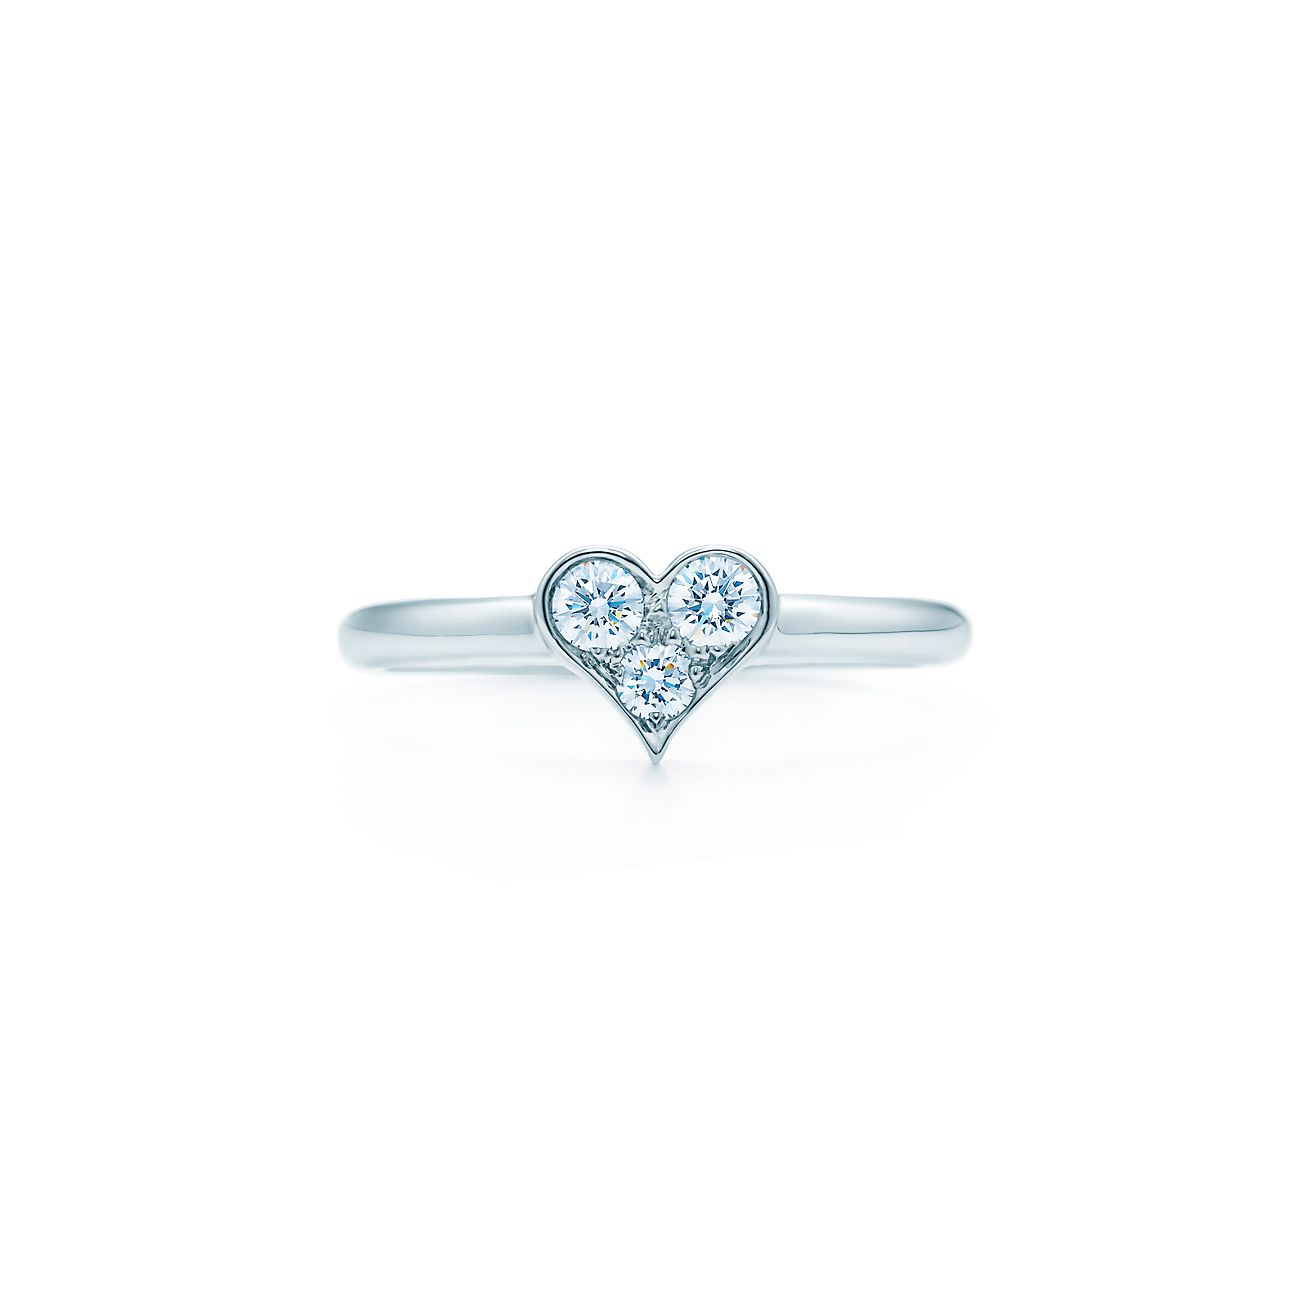 Tiffany Hearts™ ring in platinum with 